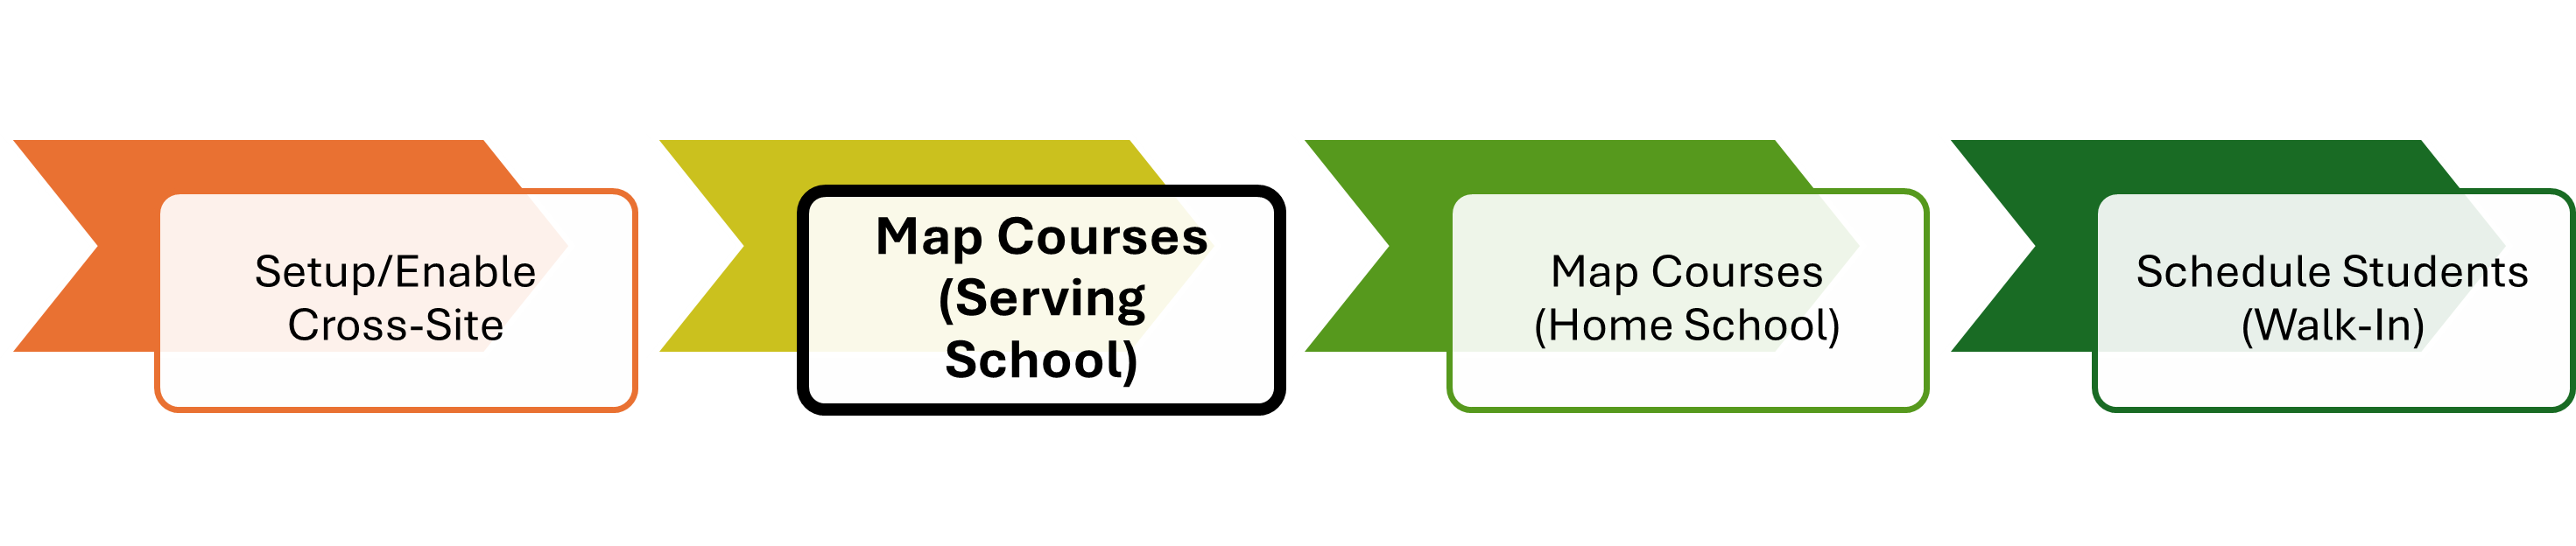 Image of Cross-Site workflow with Serving School step highlighted.